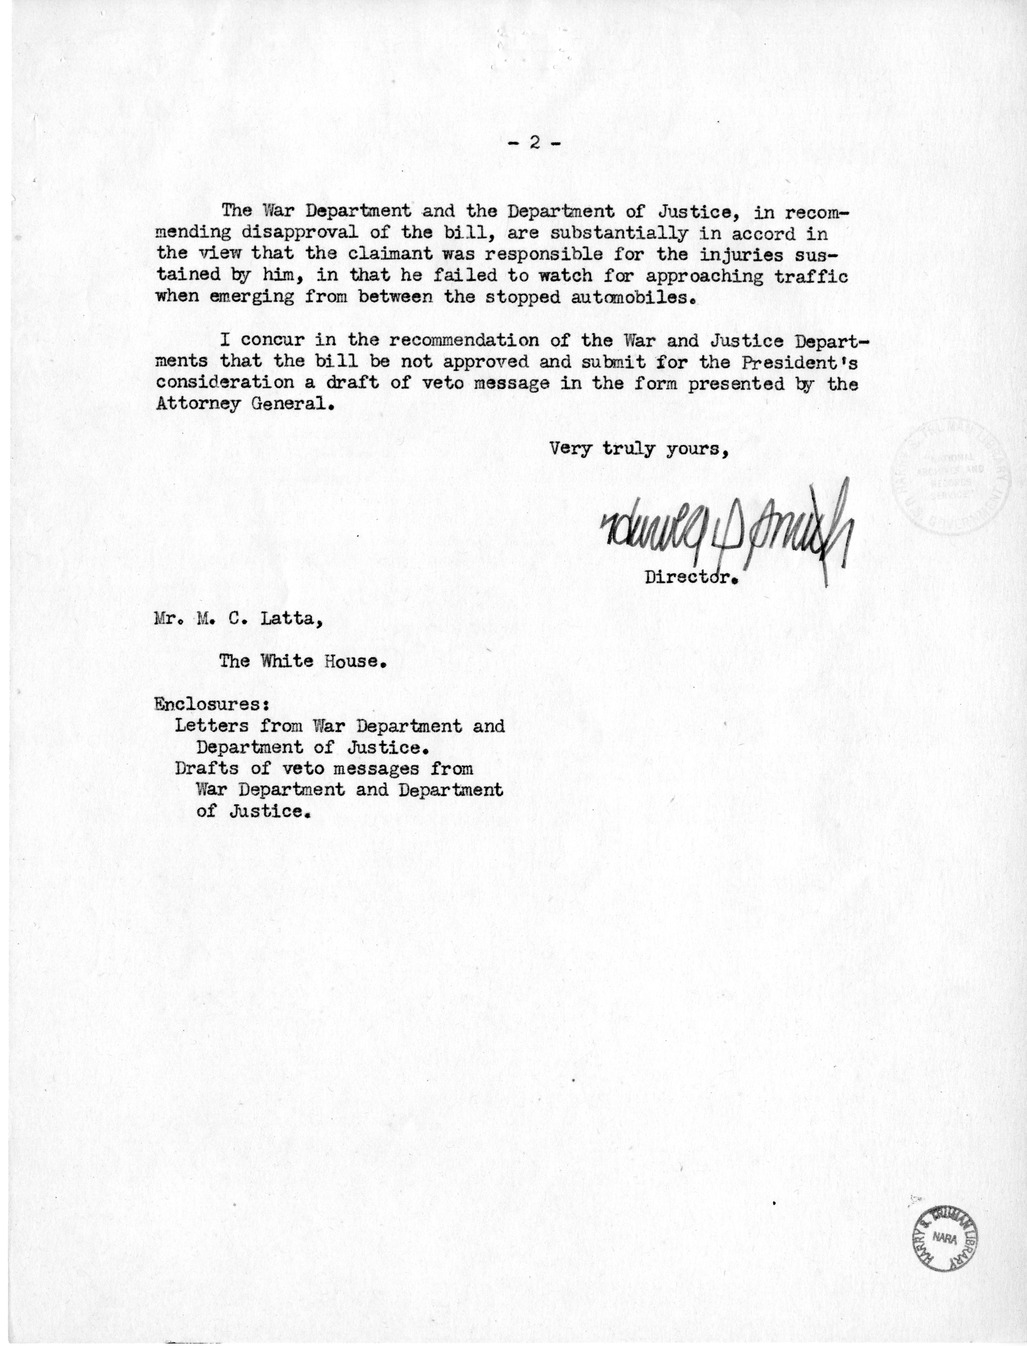 Memorandum from Harold D. Smith to M. C. Latta, H.R. 259, For the Relief of Leo Gottlieb, with Attachments